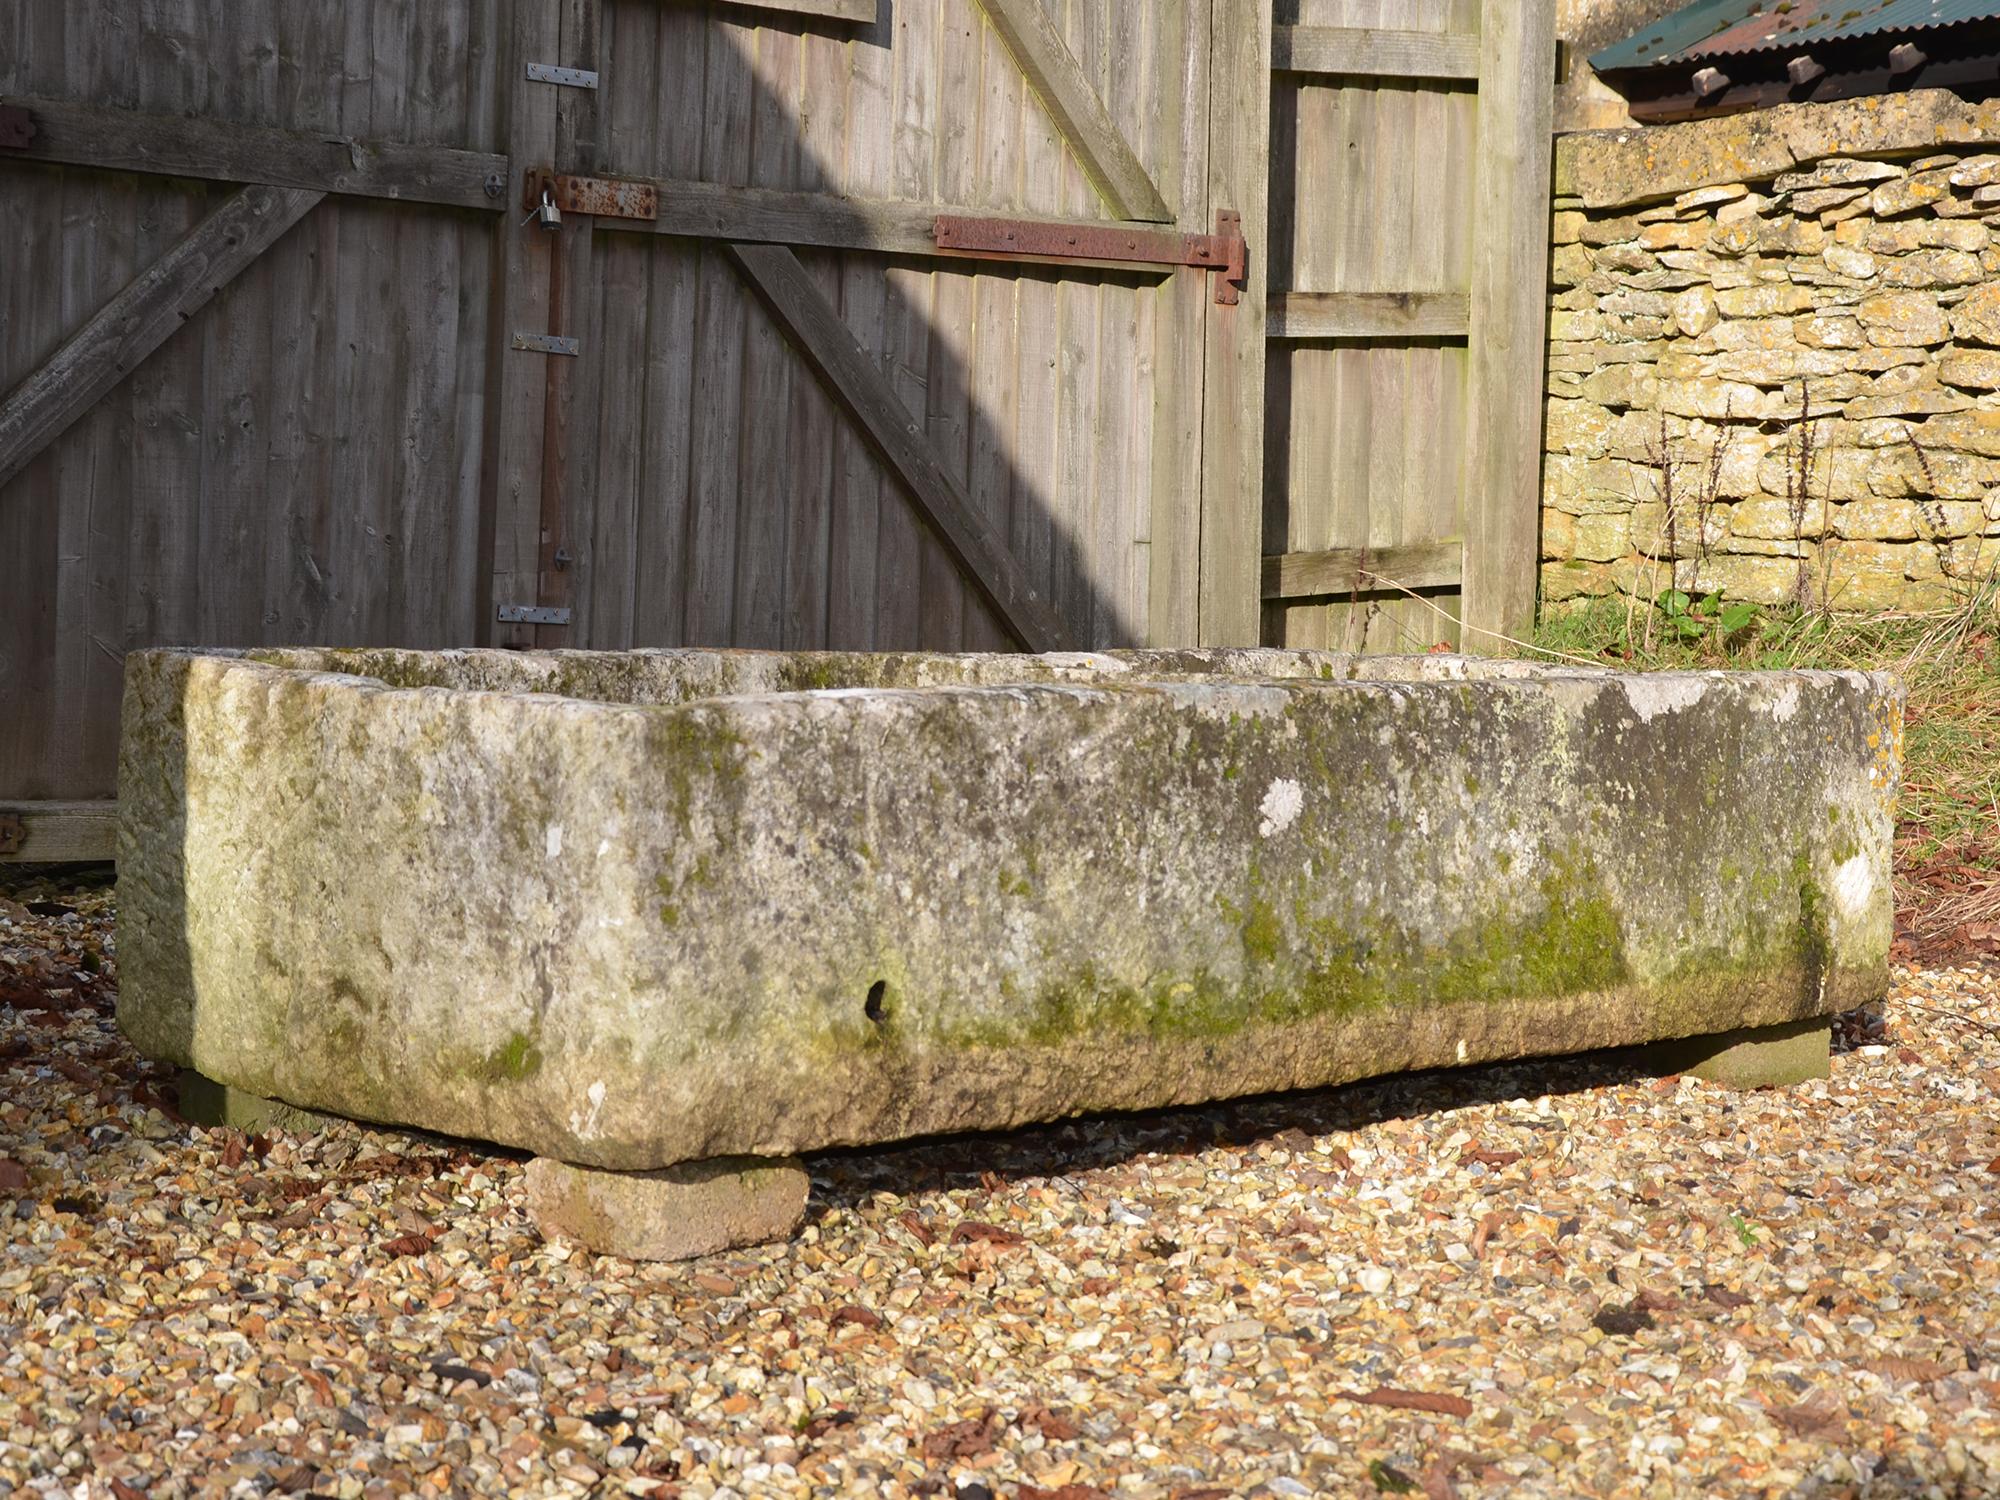 An 18th century large stone trough with good weathering and patination.